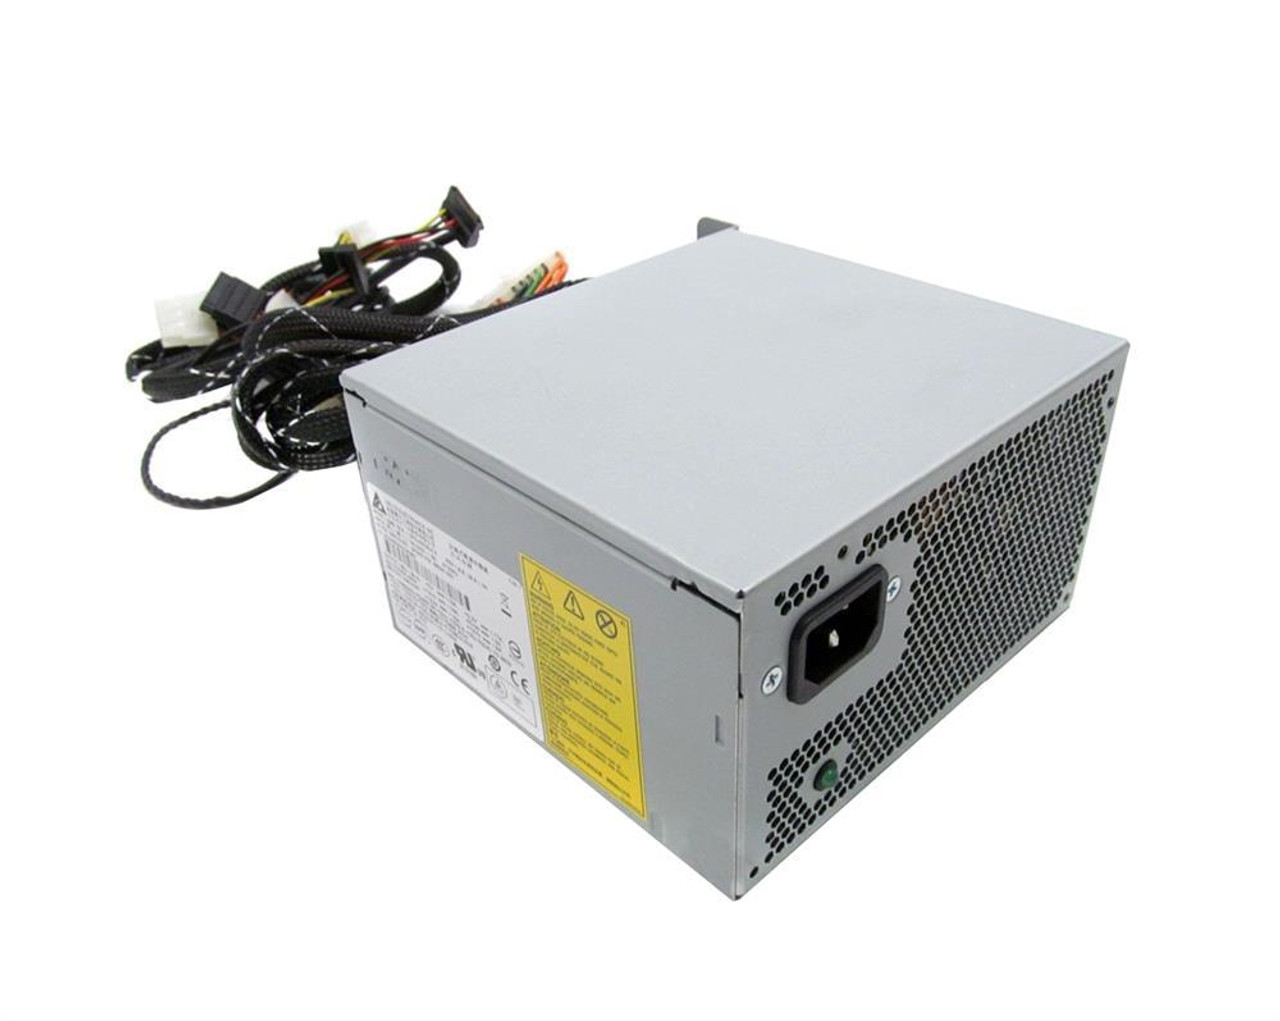 DPS-460DB-6 HP 460-Watts 100-240V AC Power Supply with Active PFC for ProLiant ML150/ ML330 G6 Server